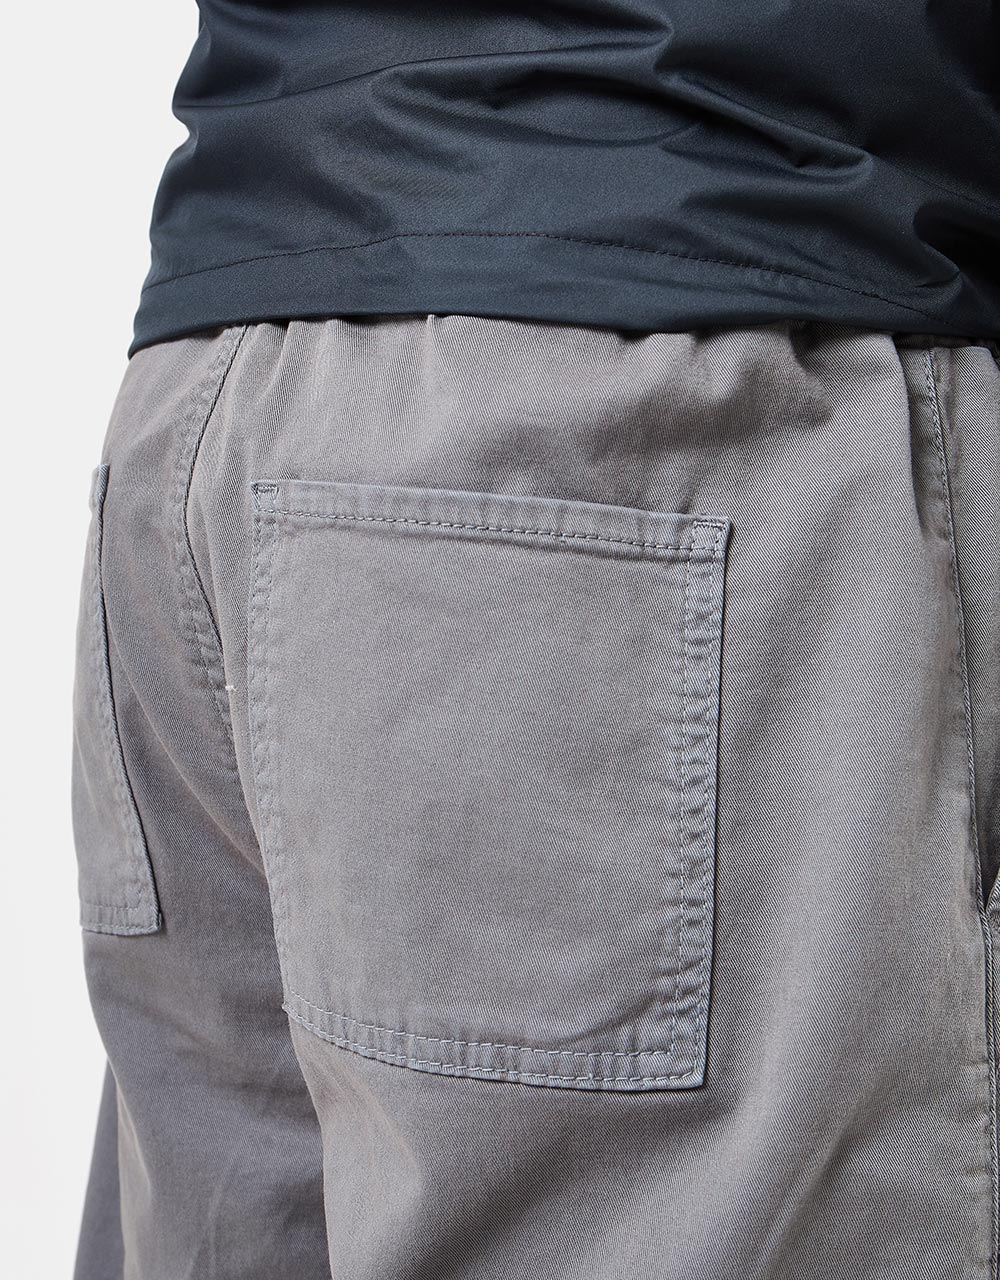 Route One Climbing Pant - Charcoal